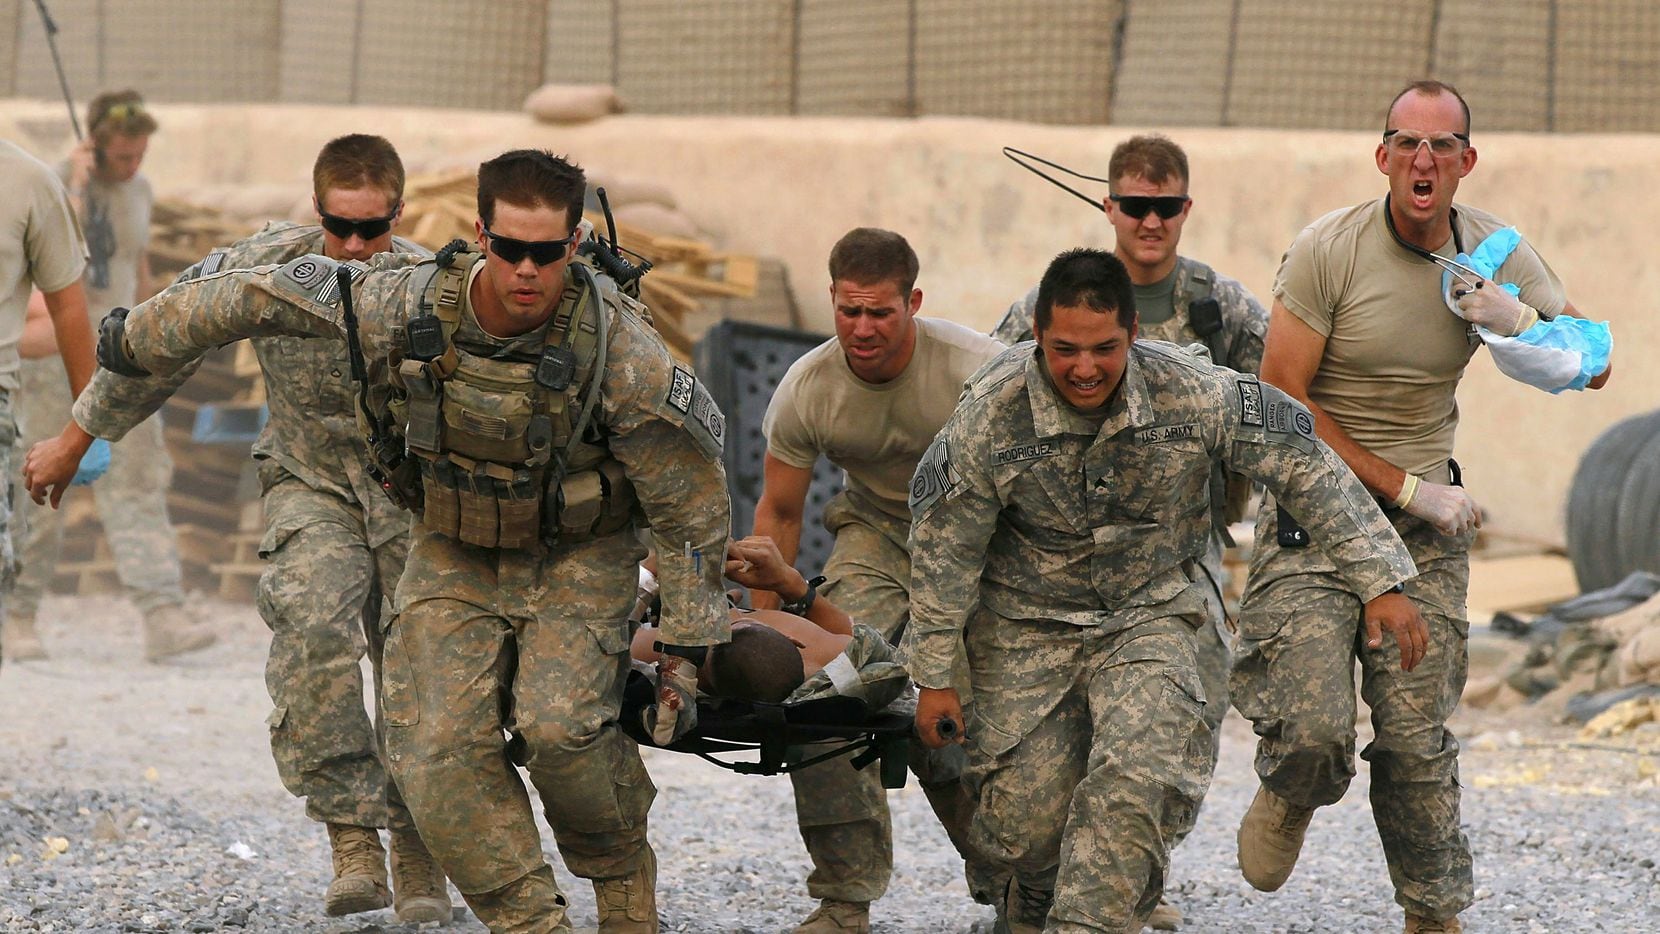 U.S. Army soldiers carry a critically wounded American soldier on a stretcher to an awaiting...